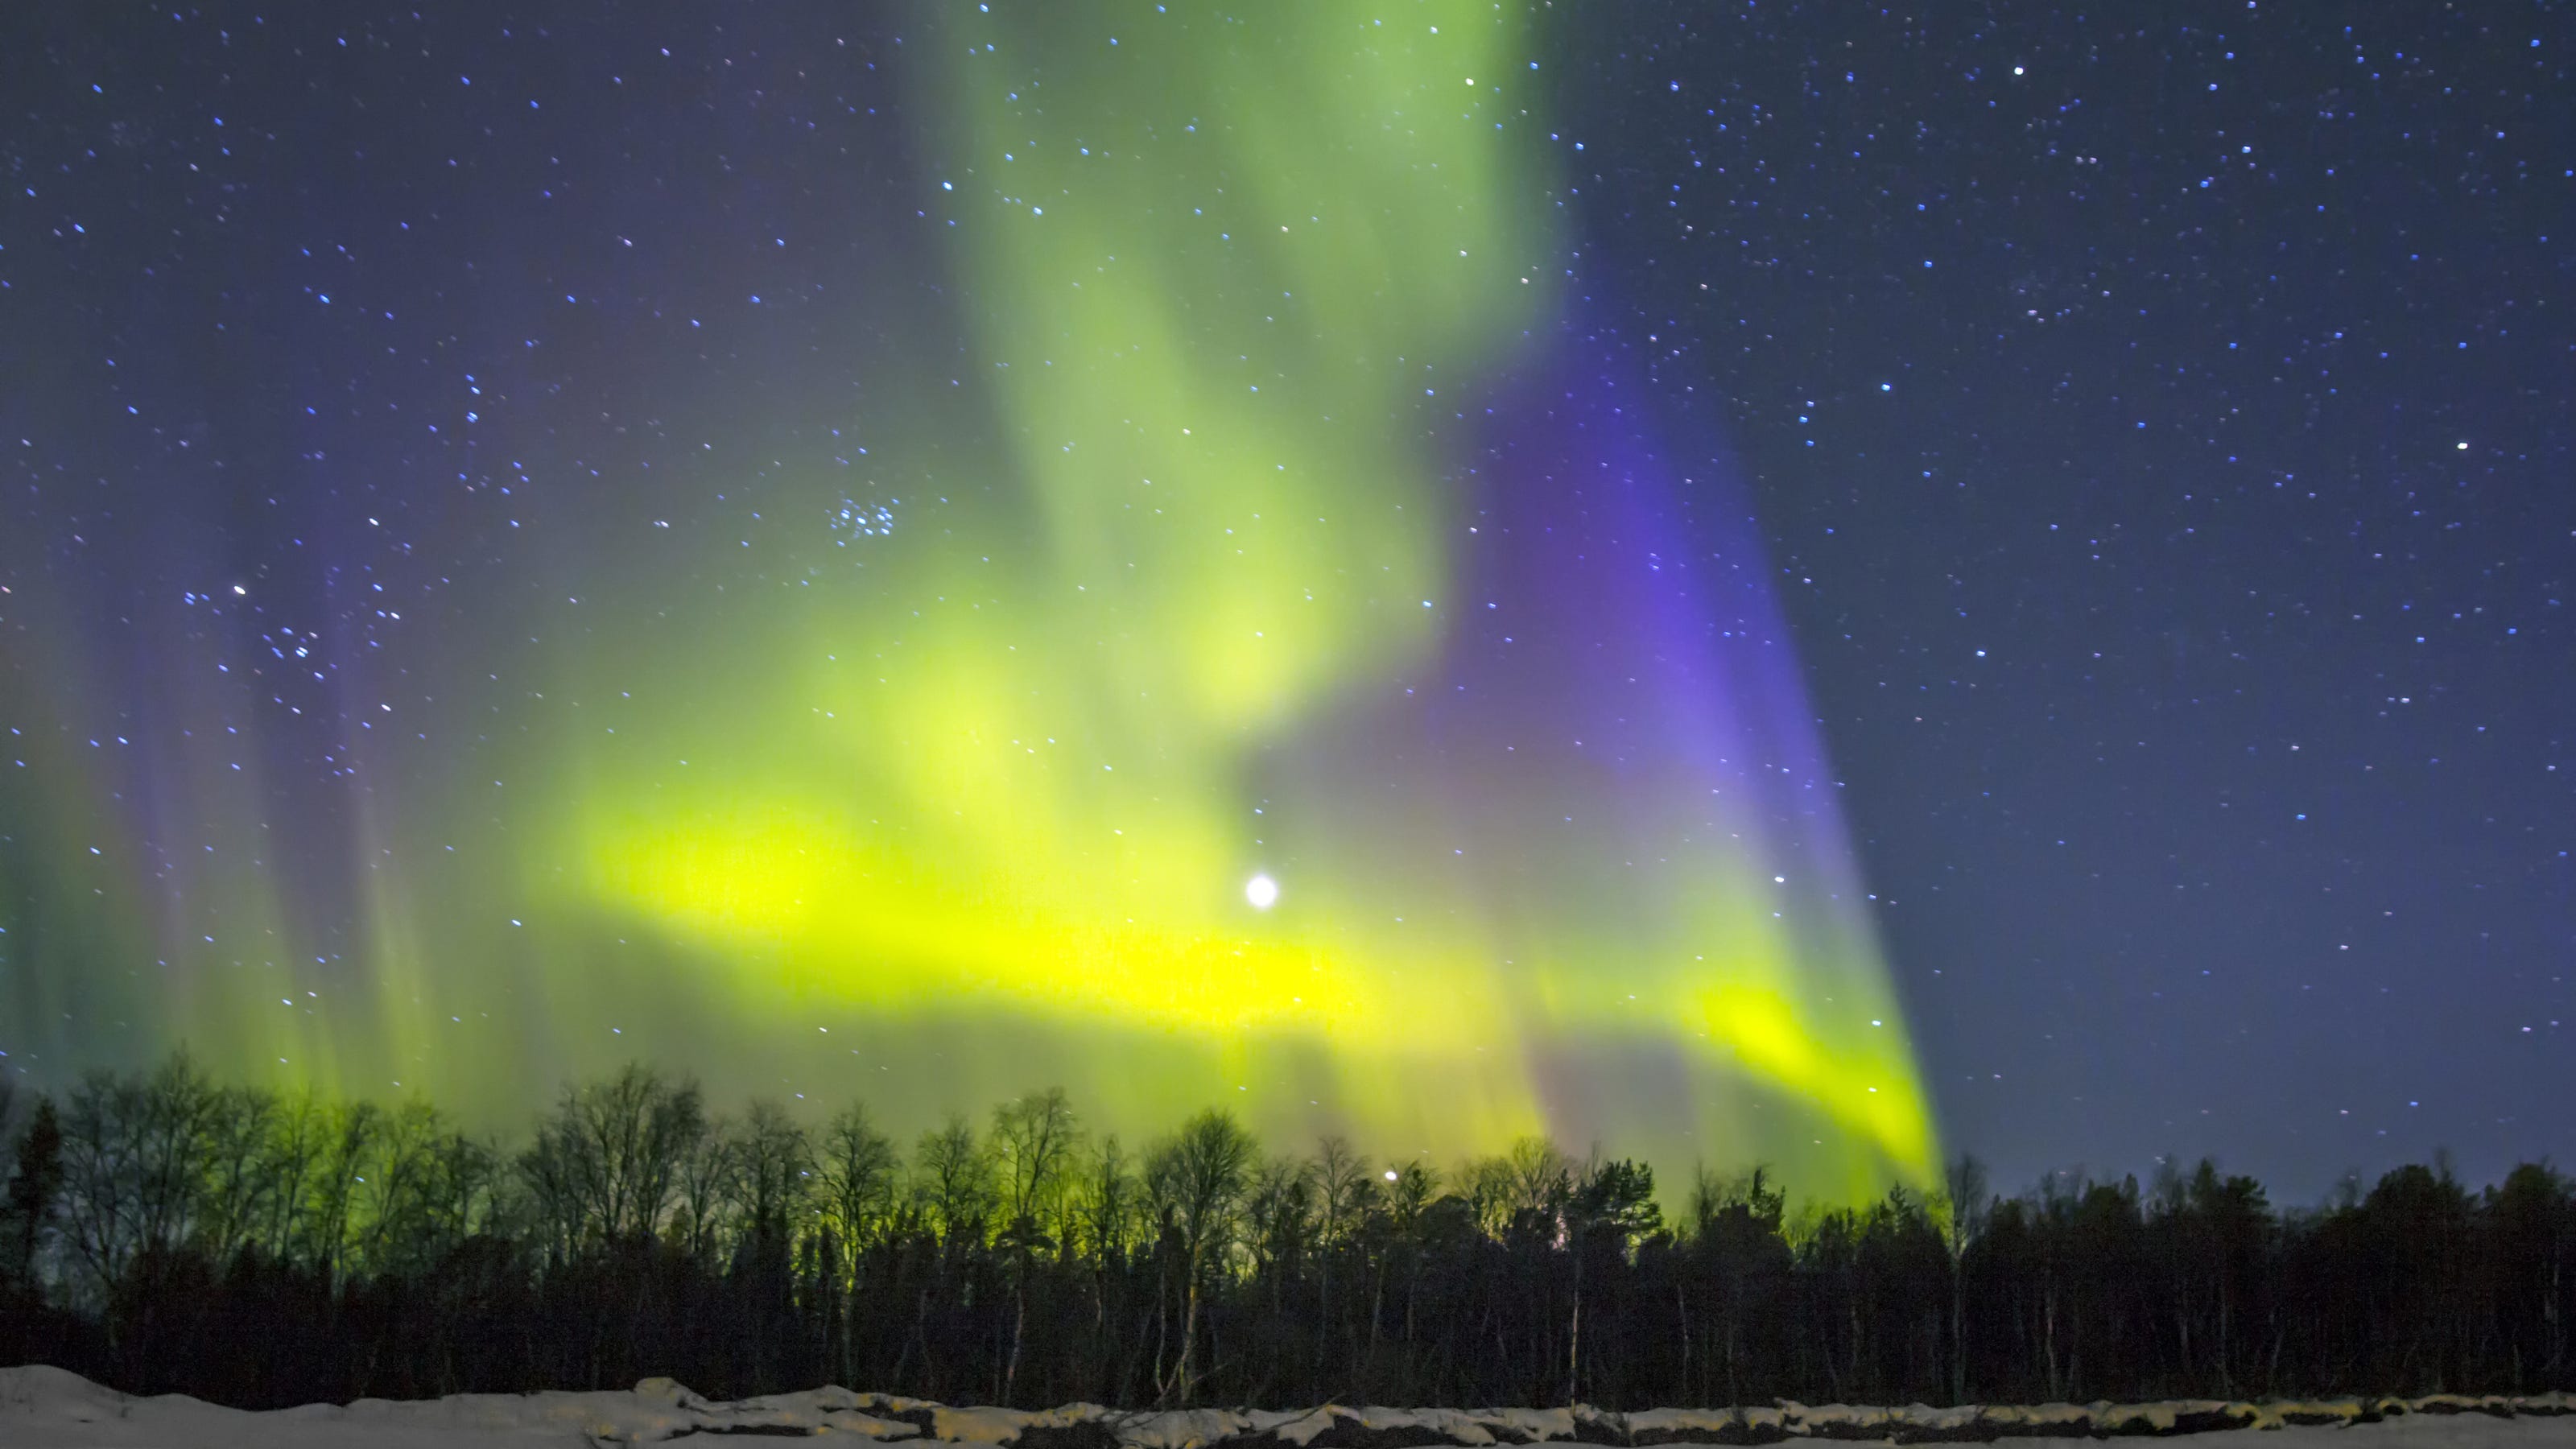 Could we see northern lights in Colorado this weekend?